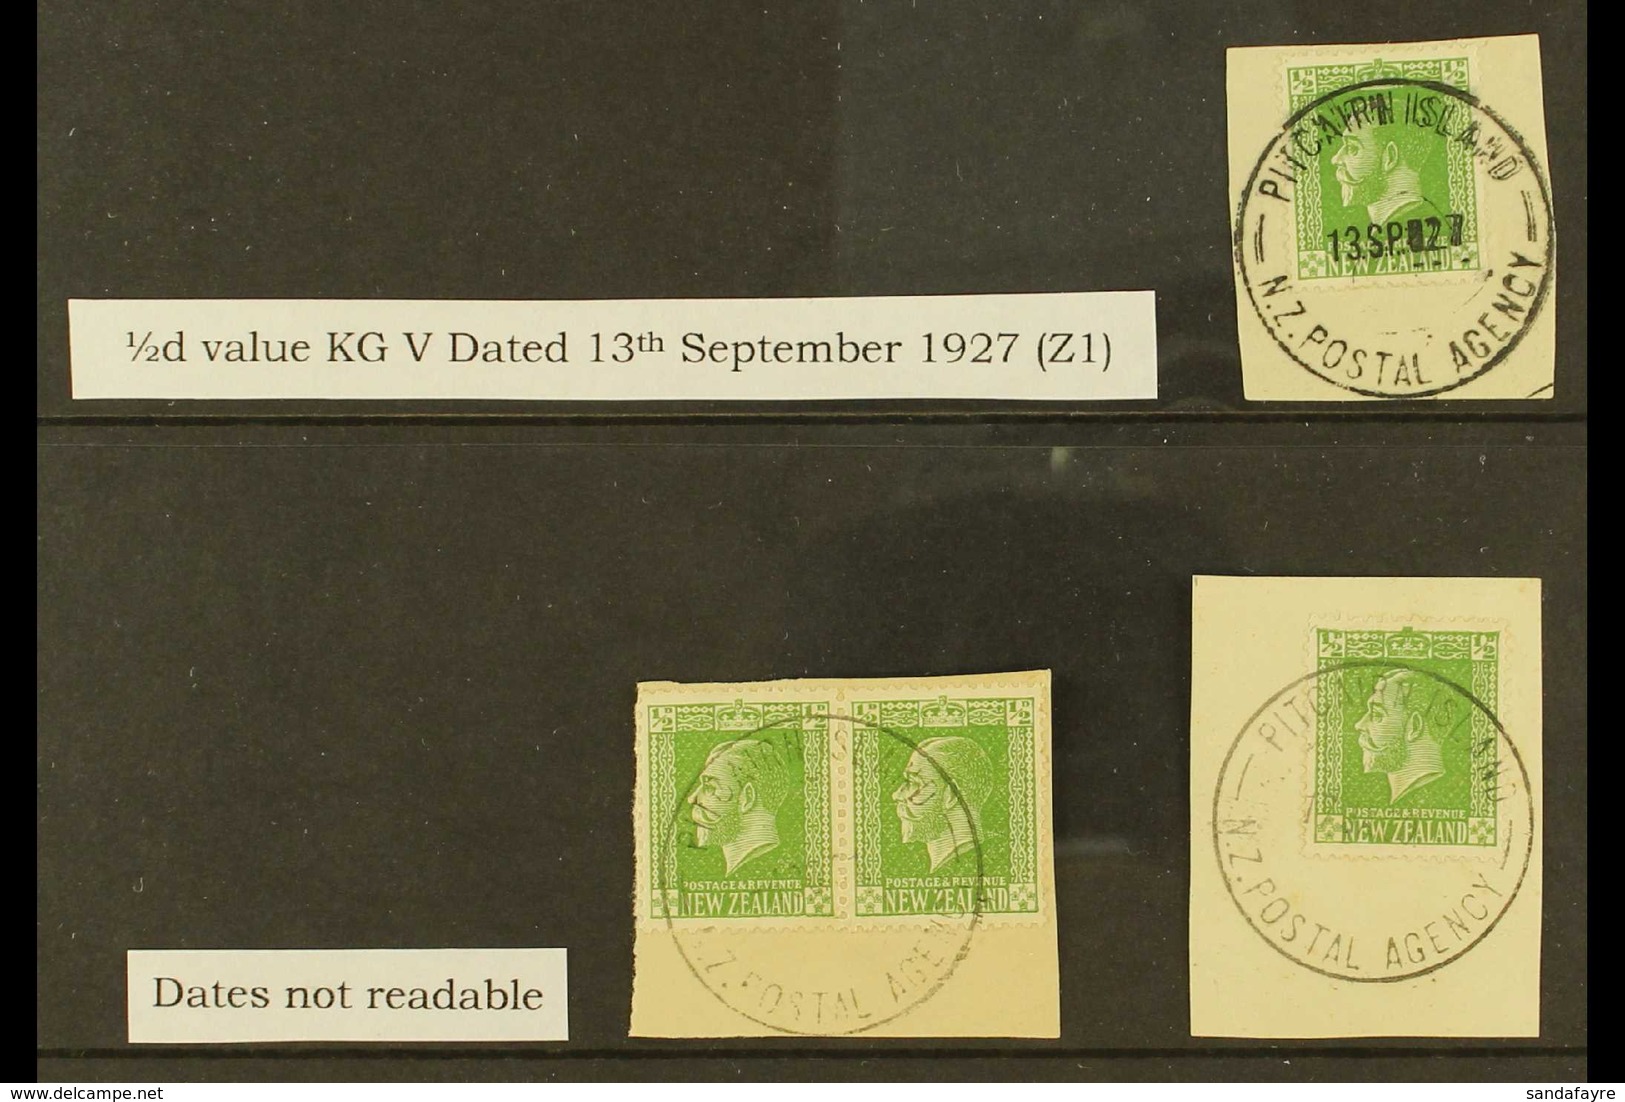 1915-29 ½d KGV Of New Zealand With "PITCAIRN ISLAND" Cds Cancels On-piece Group, SG Z1, One With Very Fine Complete Canc - Pitcairn